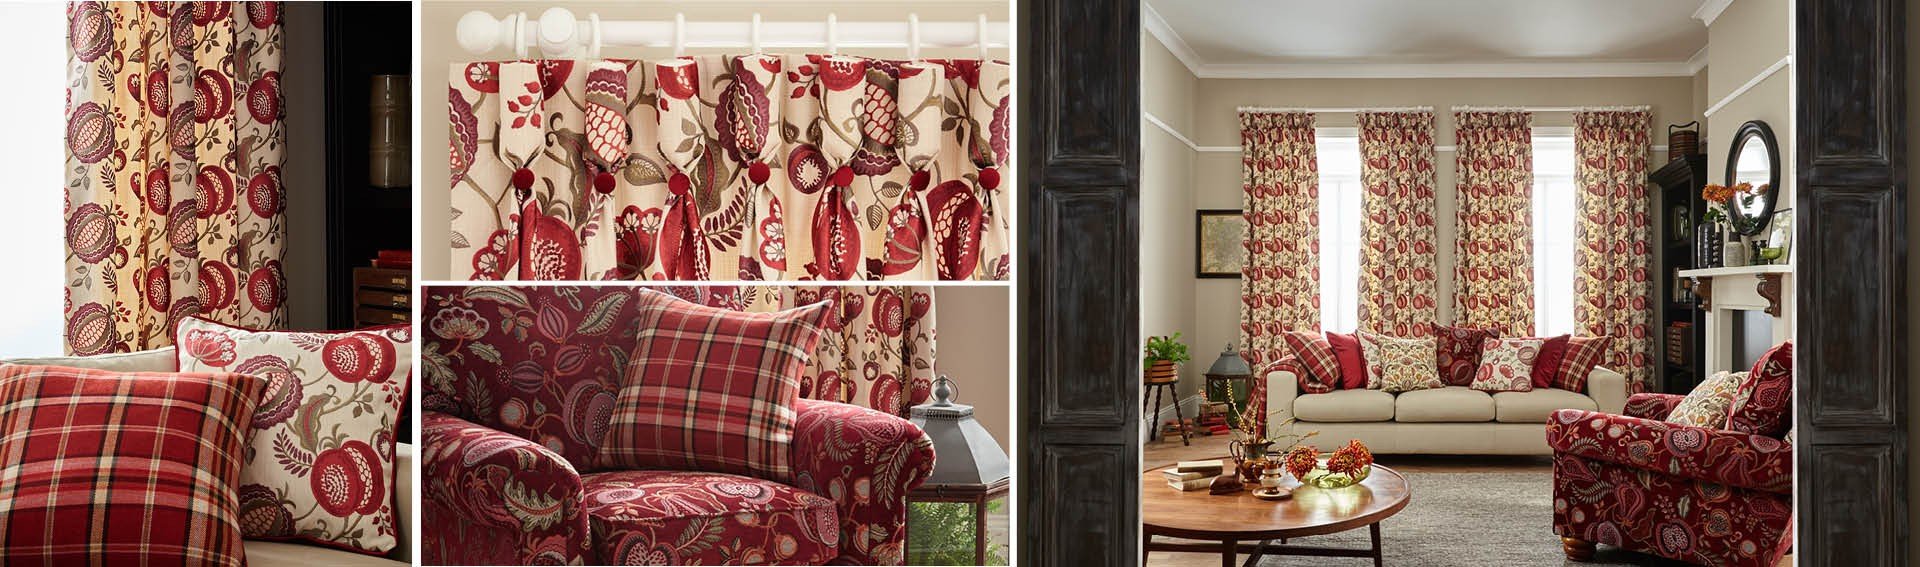 Red Patterned Curtains and Tartan Cushions